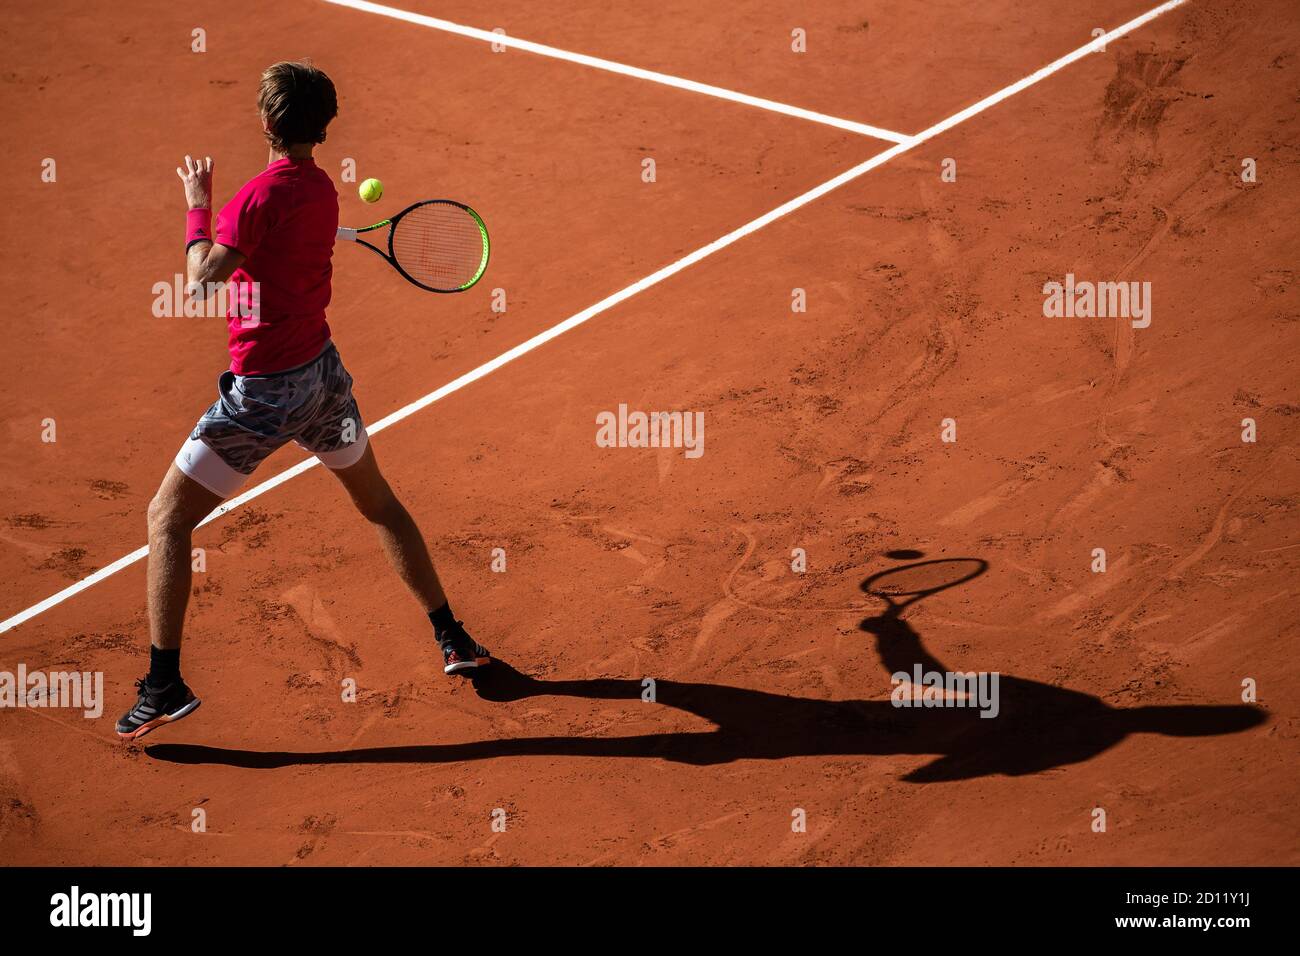 Paris, France. 4th Oct, 2020. Sebastian Korda hits a return during the men's singles 4th round match between Rafael Nadal of Spain and Sebastian Korda of the United States at the French Open tennis tournament 2020 at Roland Garros in Paris, France, Oct. 4, 2020. Credit: Aurelien Morissard/Xinhua/Alamy Live News Stock Photo